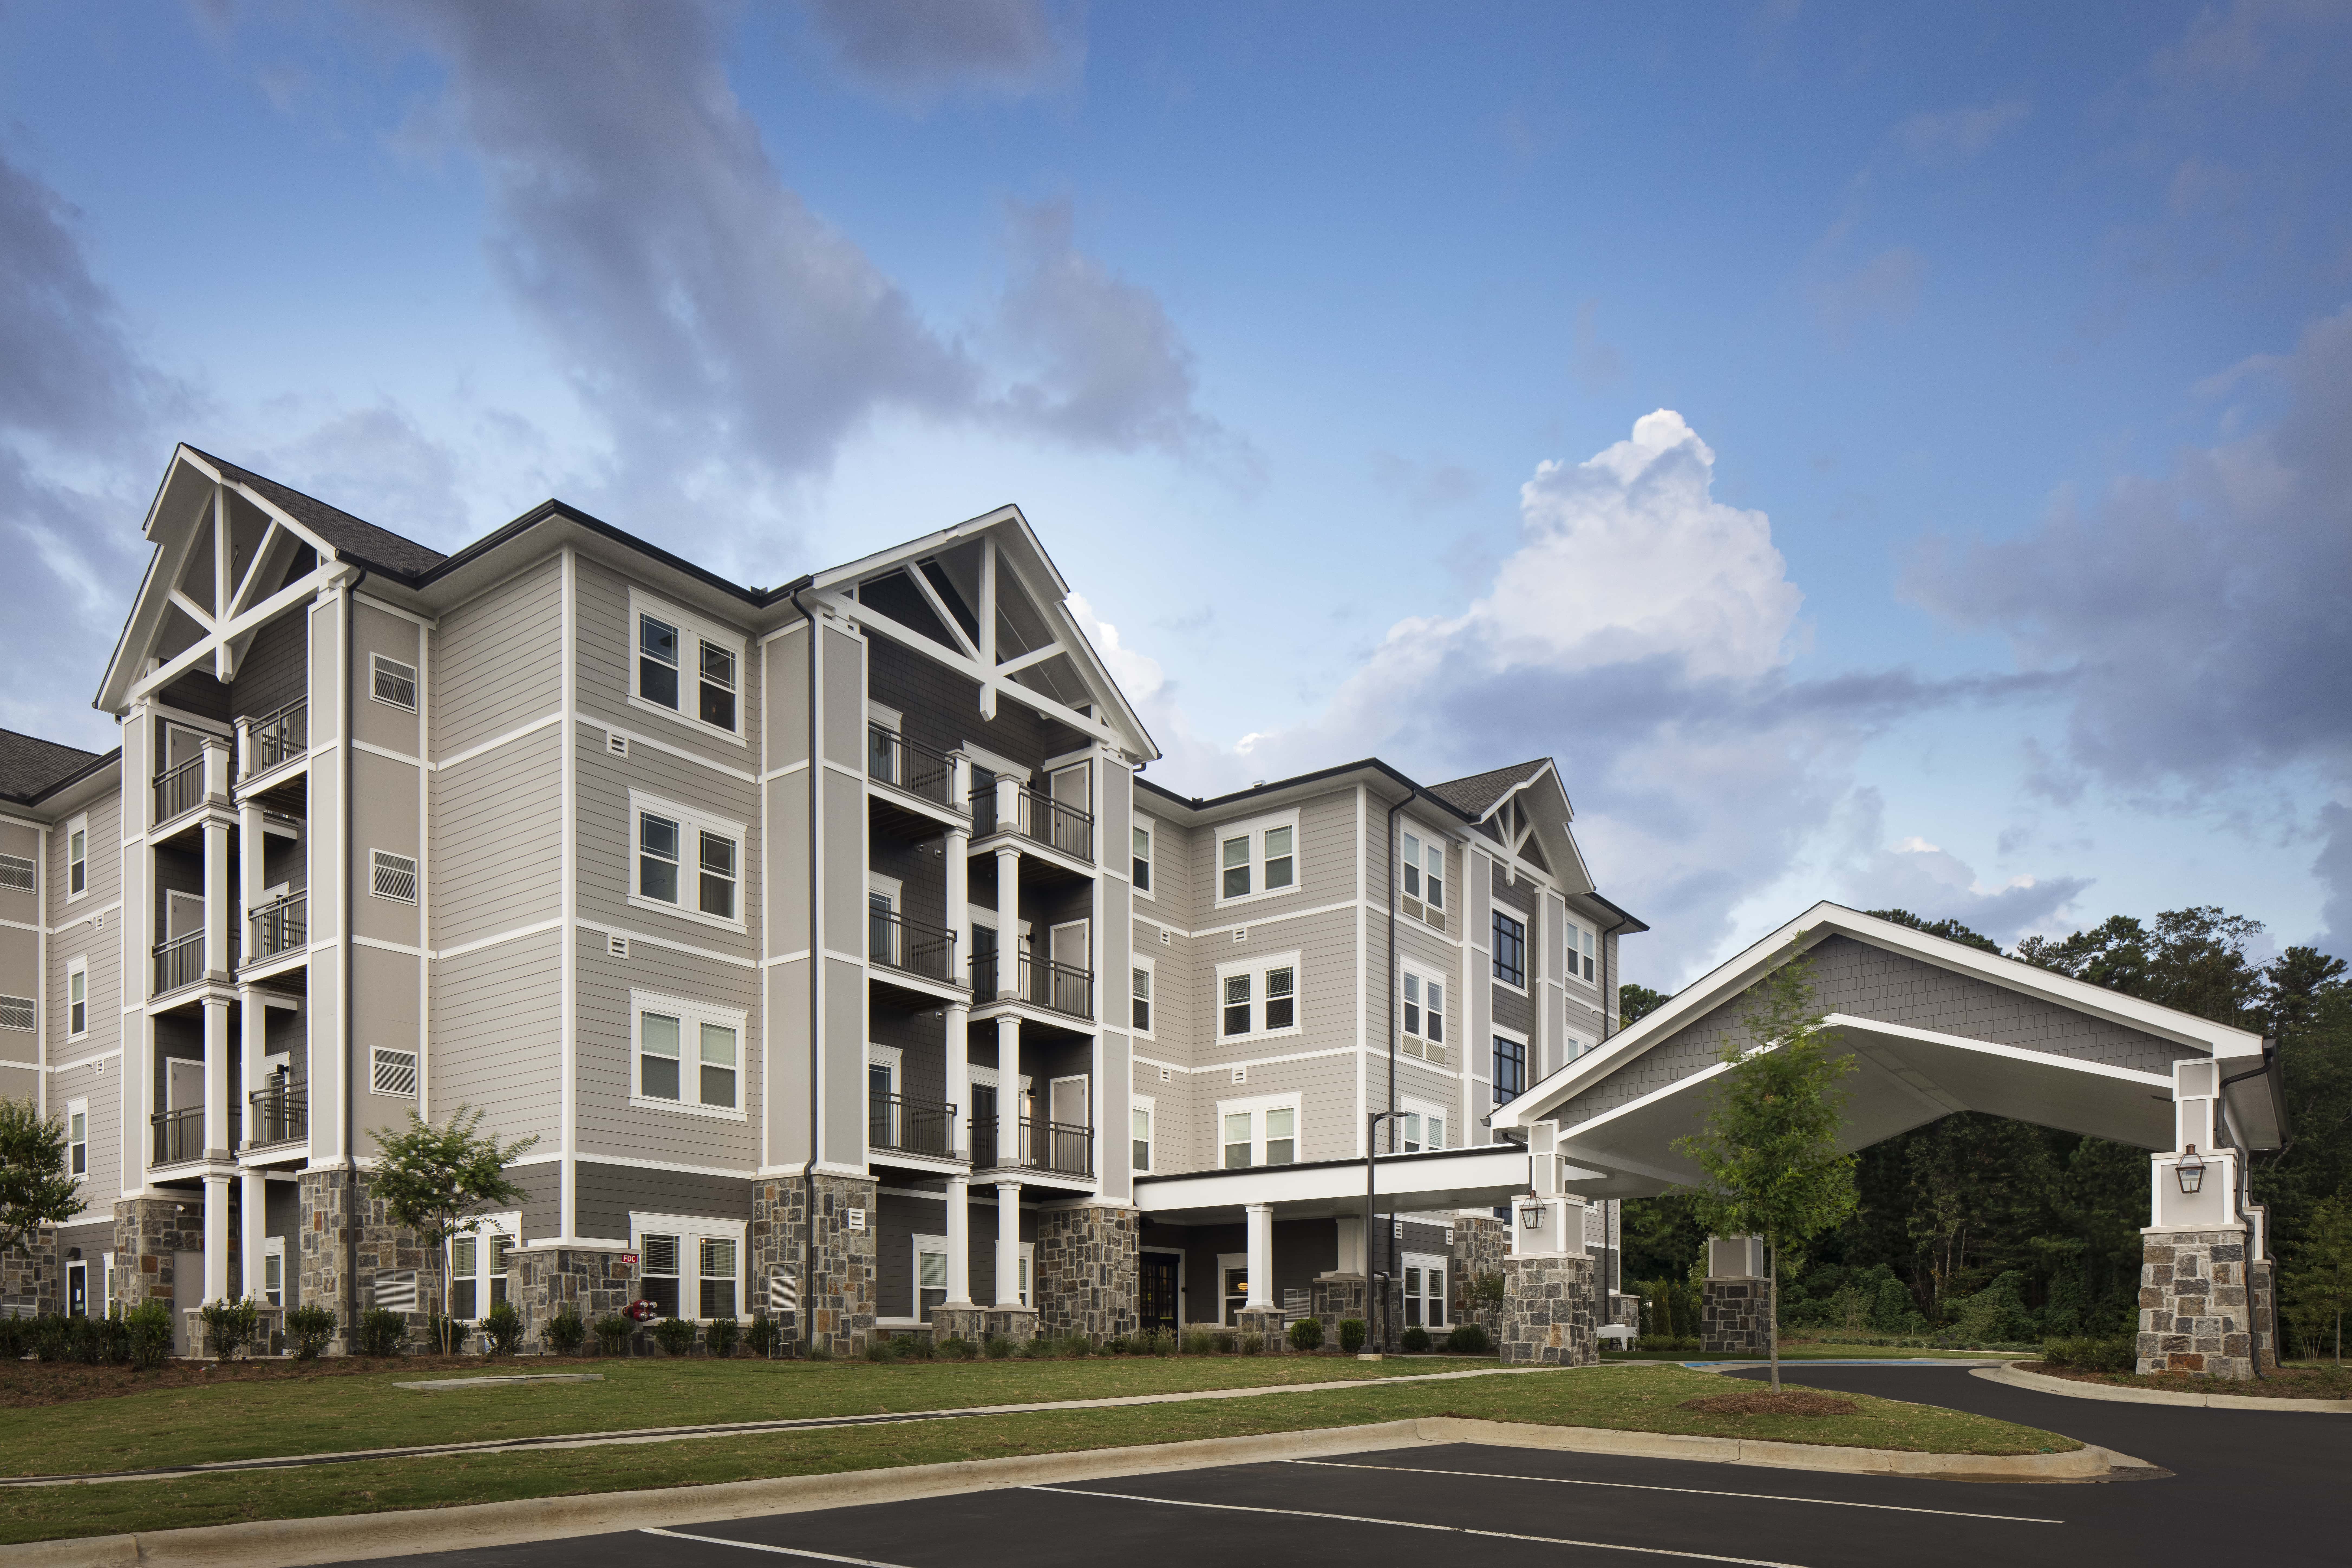 KIRCO and Phoenix Senior Living Announce Completion of The Bluffs at Greystone in Birmingham, Ala.